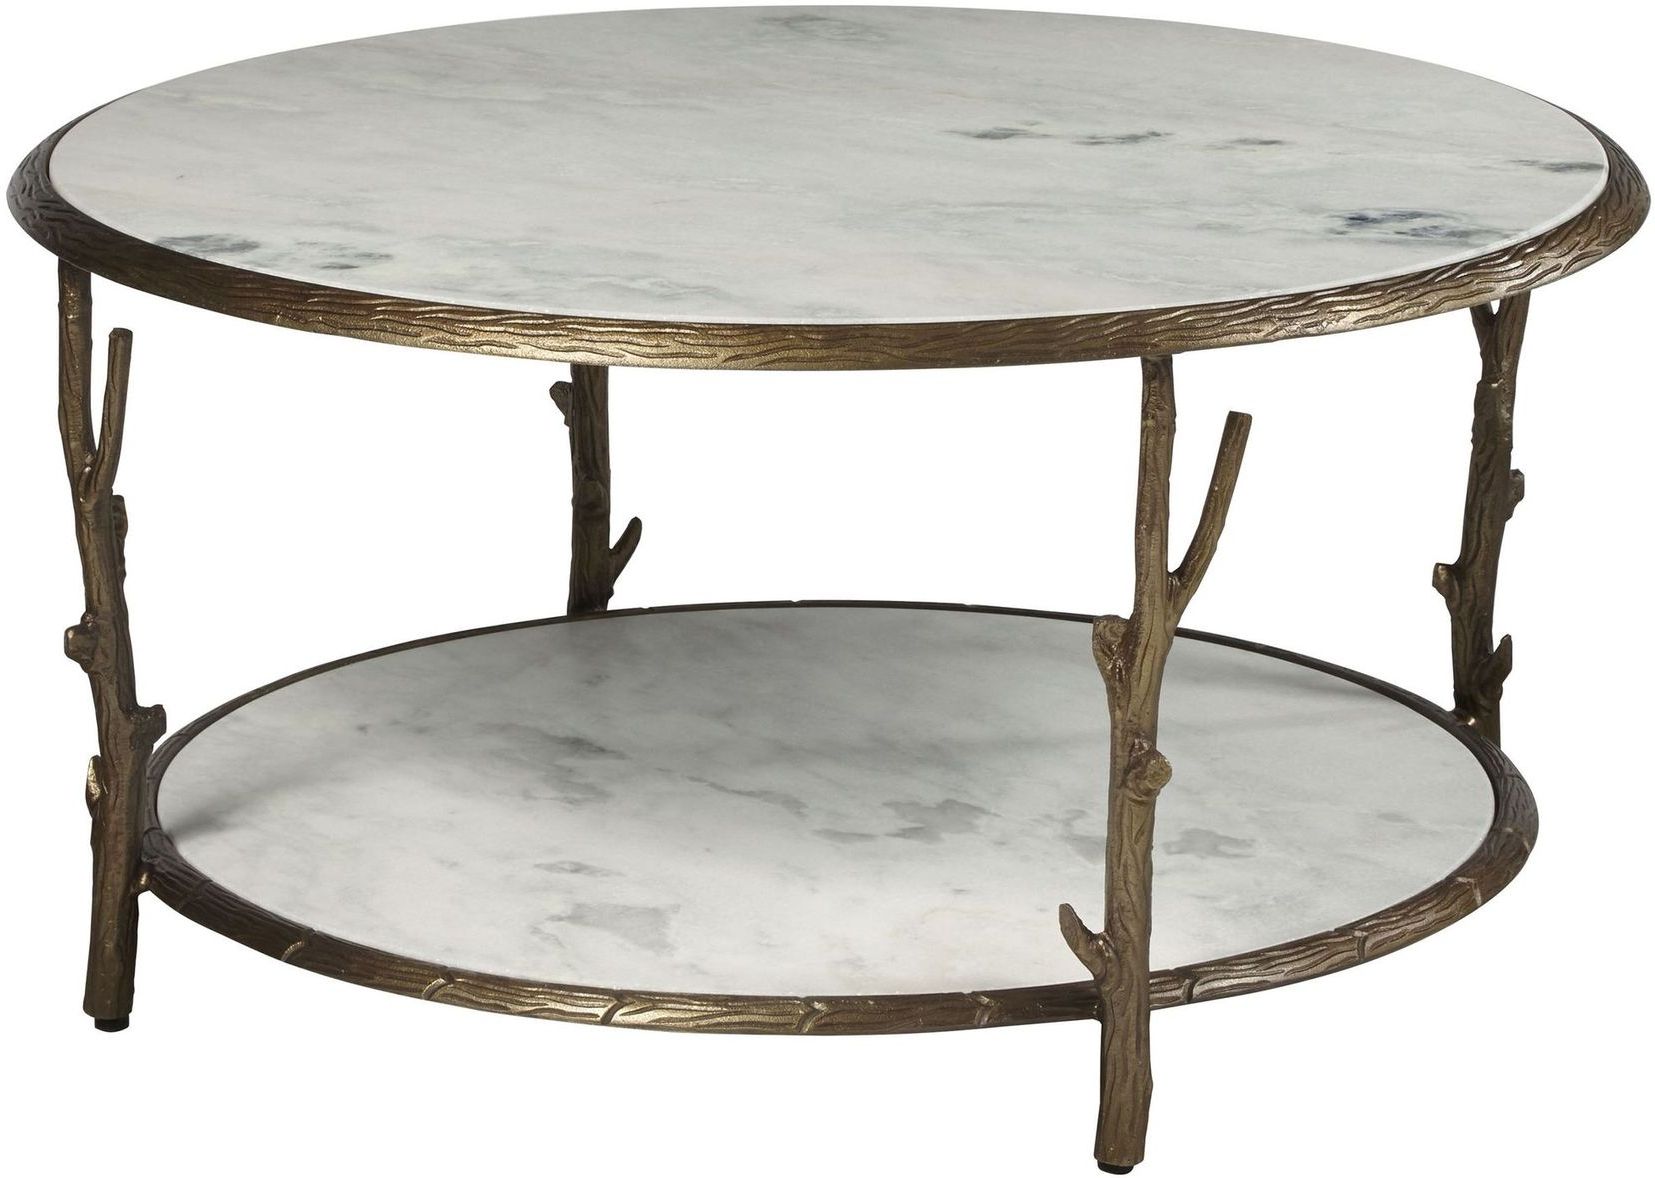 2019 Antique Cocktail Tables With Antique Accents Marble Brady Cocktail Table 2 Piece Set (View 10 of 20)